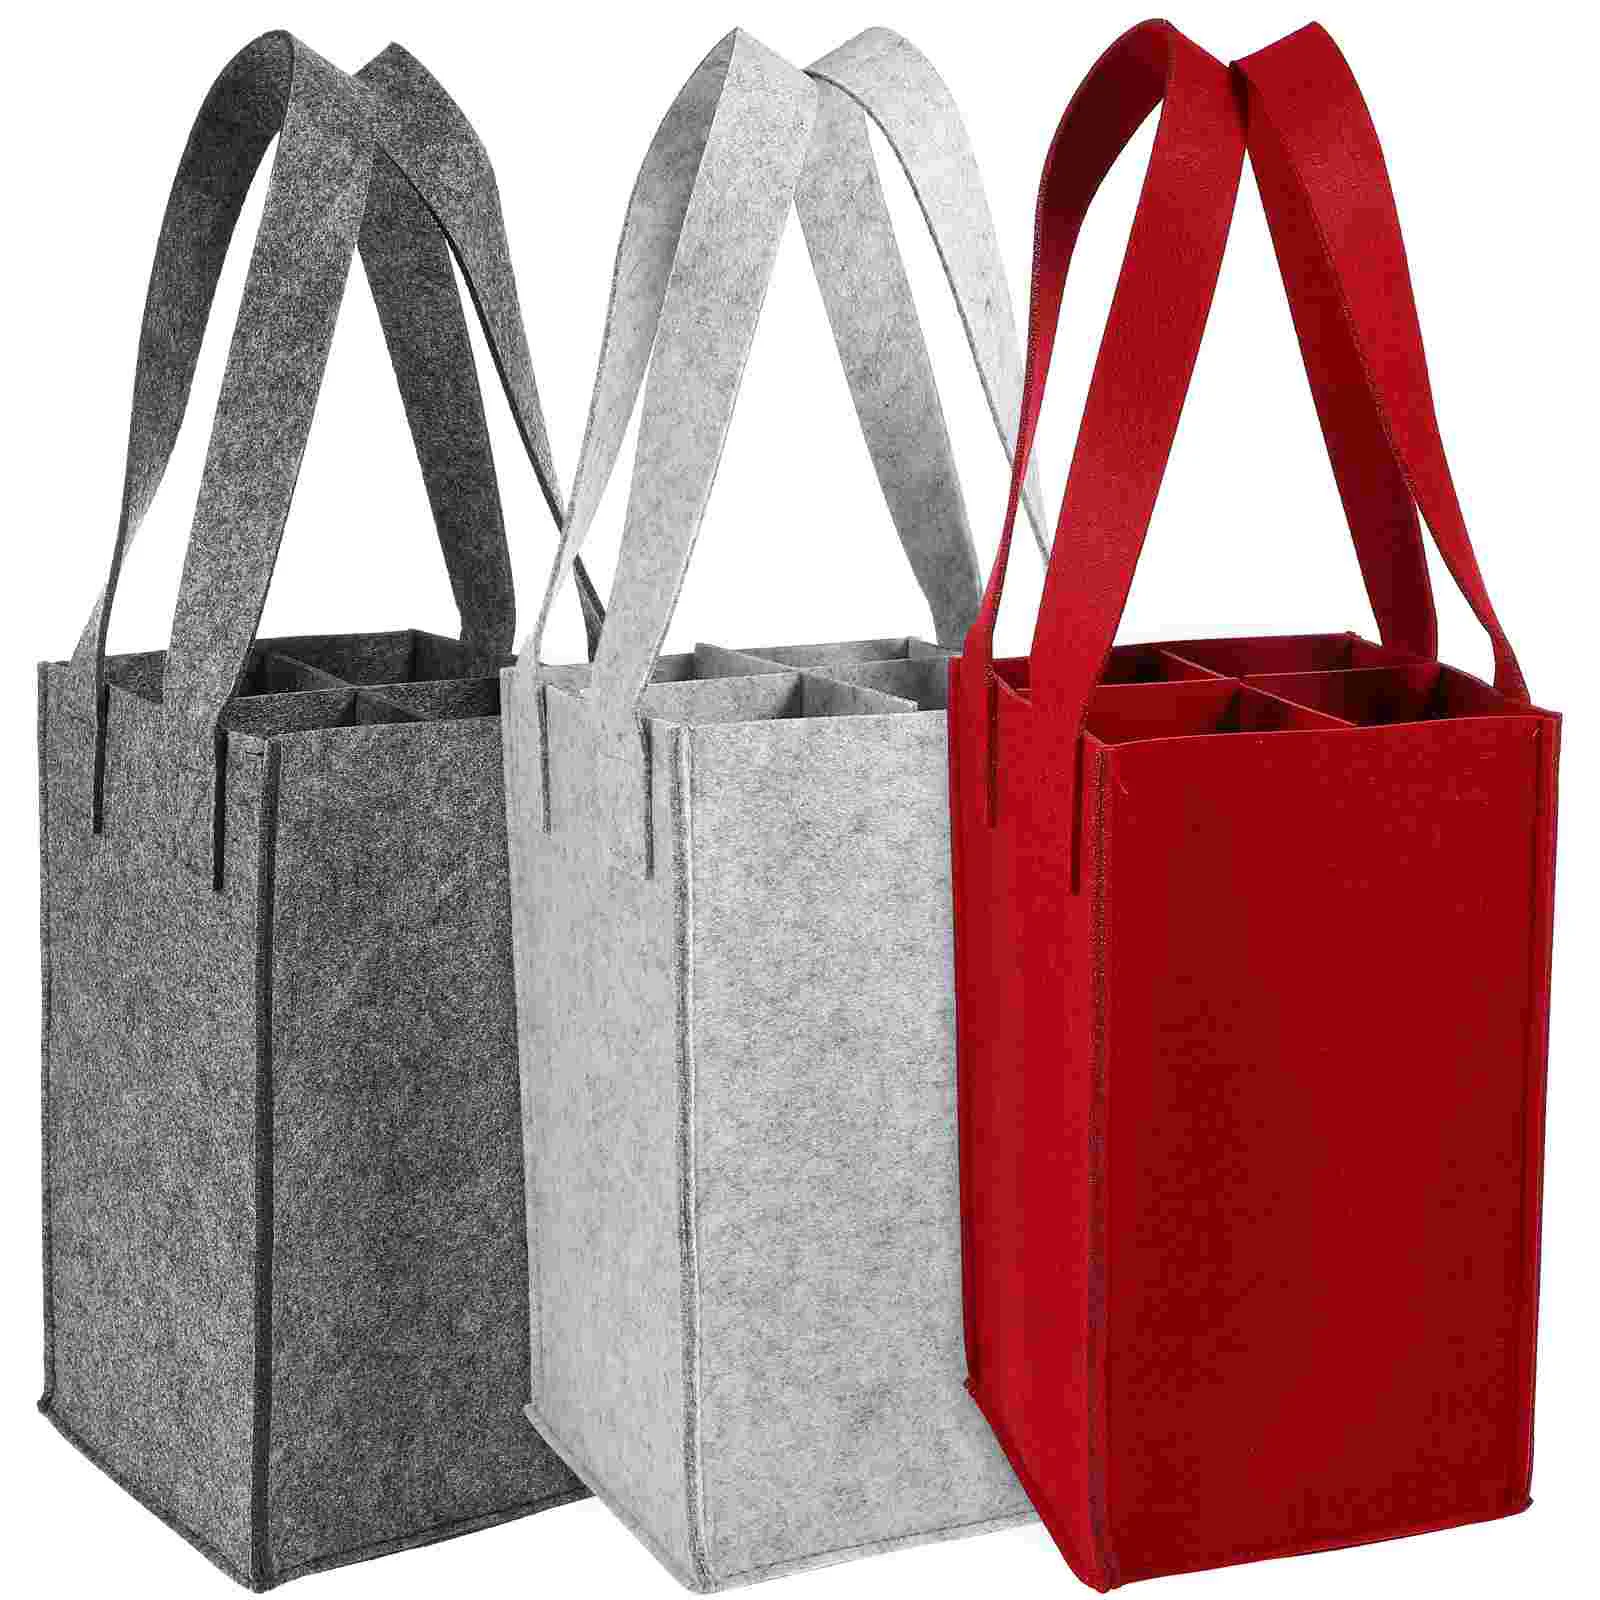 

3 Pcs Bag Divider Bottles Bags Carriers Felt Collapsible Grocery Tote Carry Picnics Foldable Beer cooler